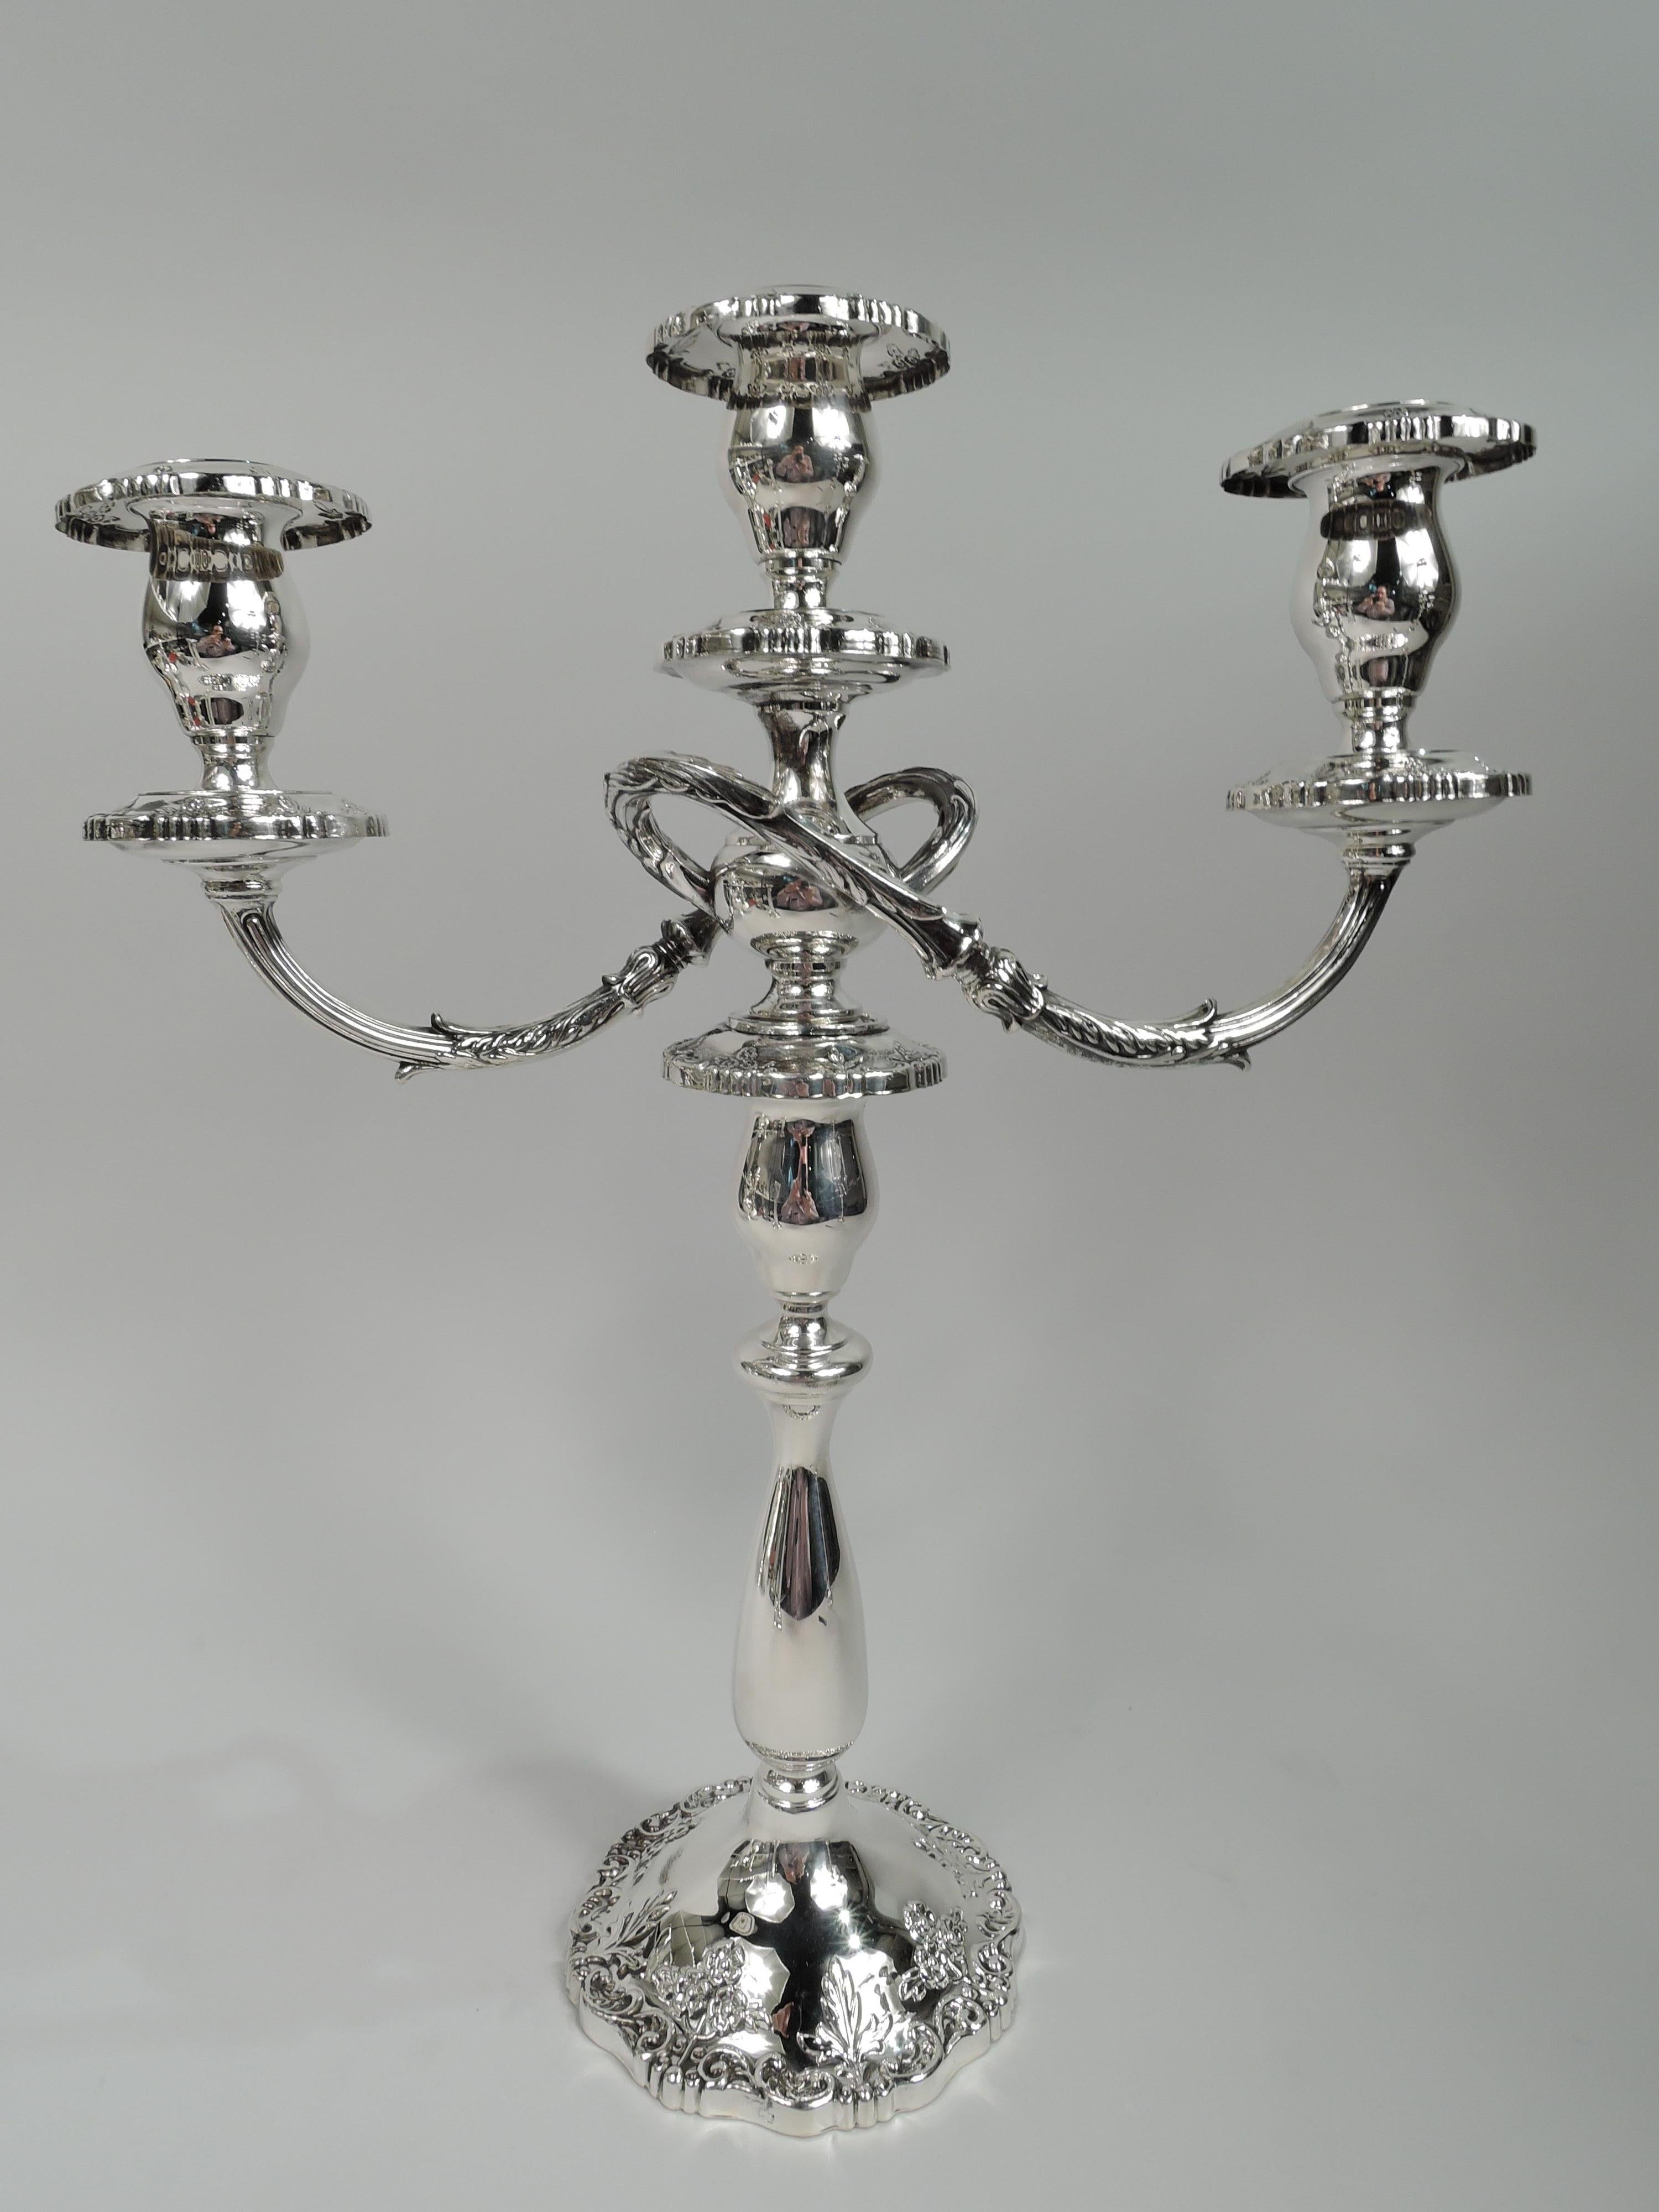 Pair of English Rose sterling silver 3-light candelabra. Made by Fisher in Jersey City, New Jersey. Each: Knopped baluster shaft on raised foot. Central socket and 2 wraparound leaf-wrapped and reeded arms, each terminating in single socket. Sockets